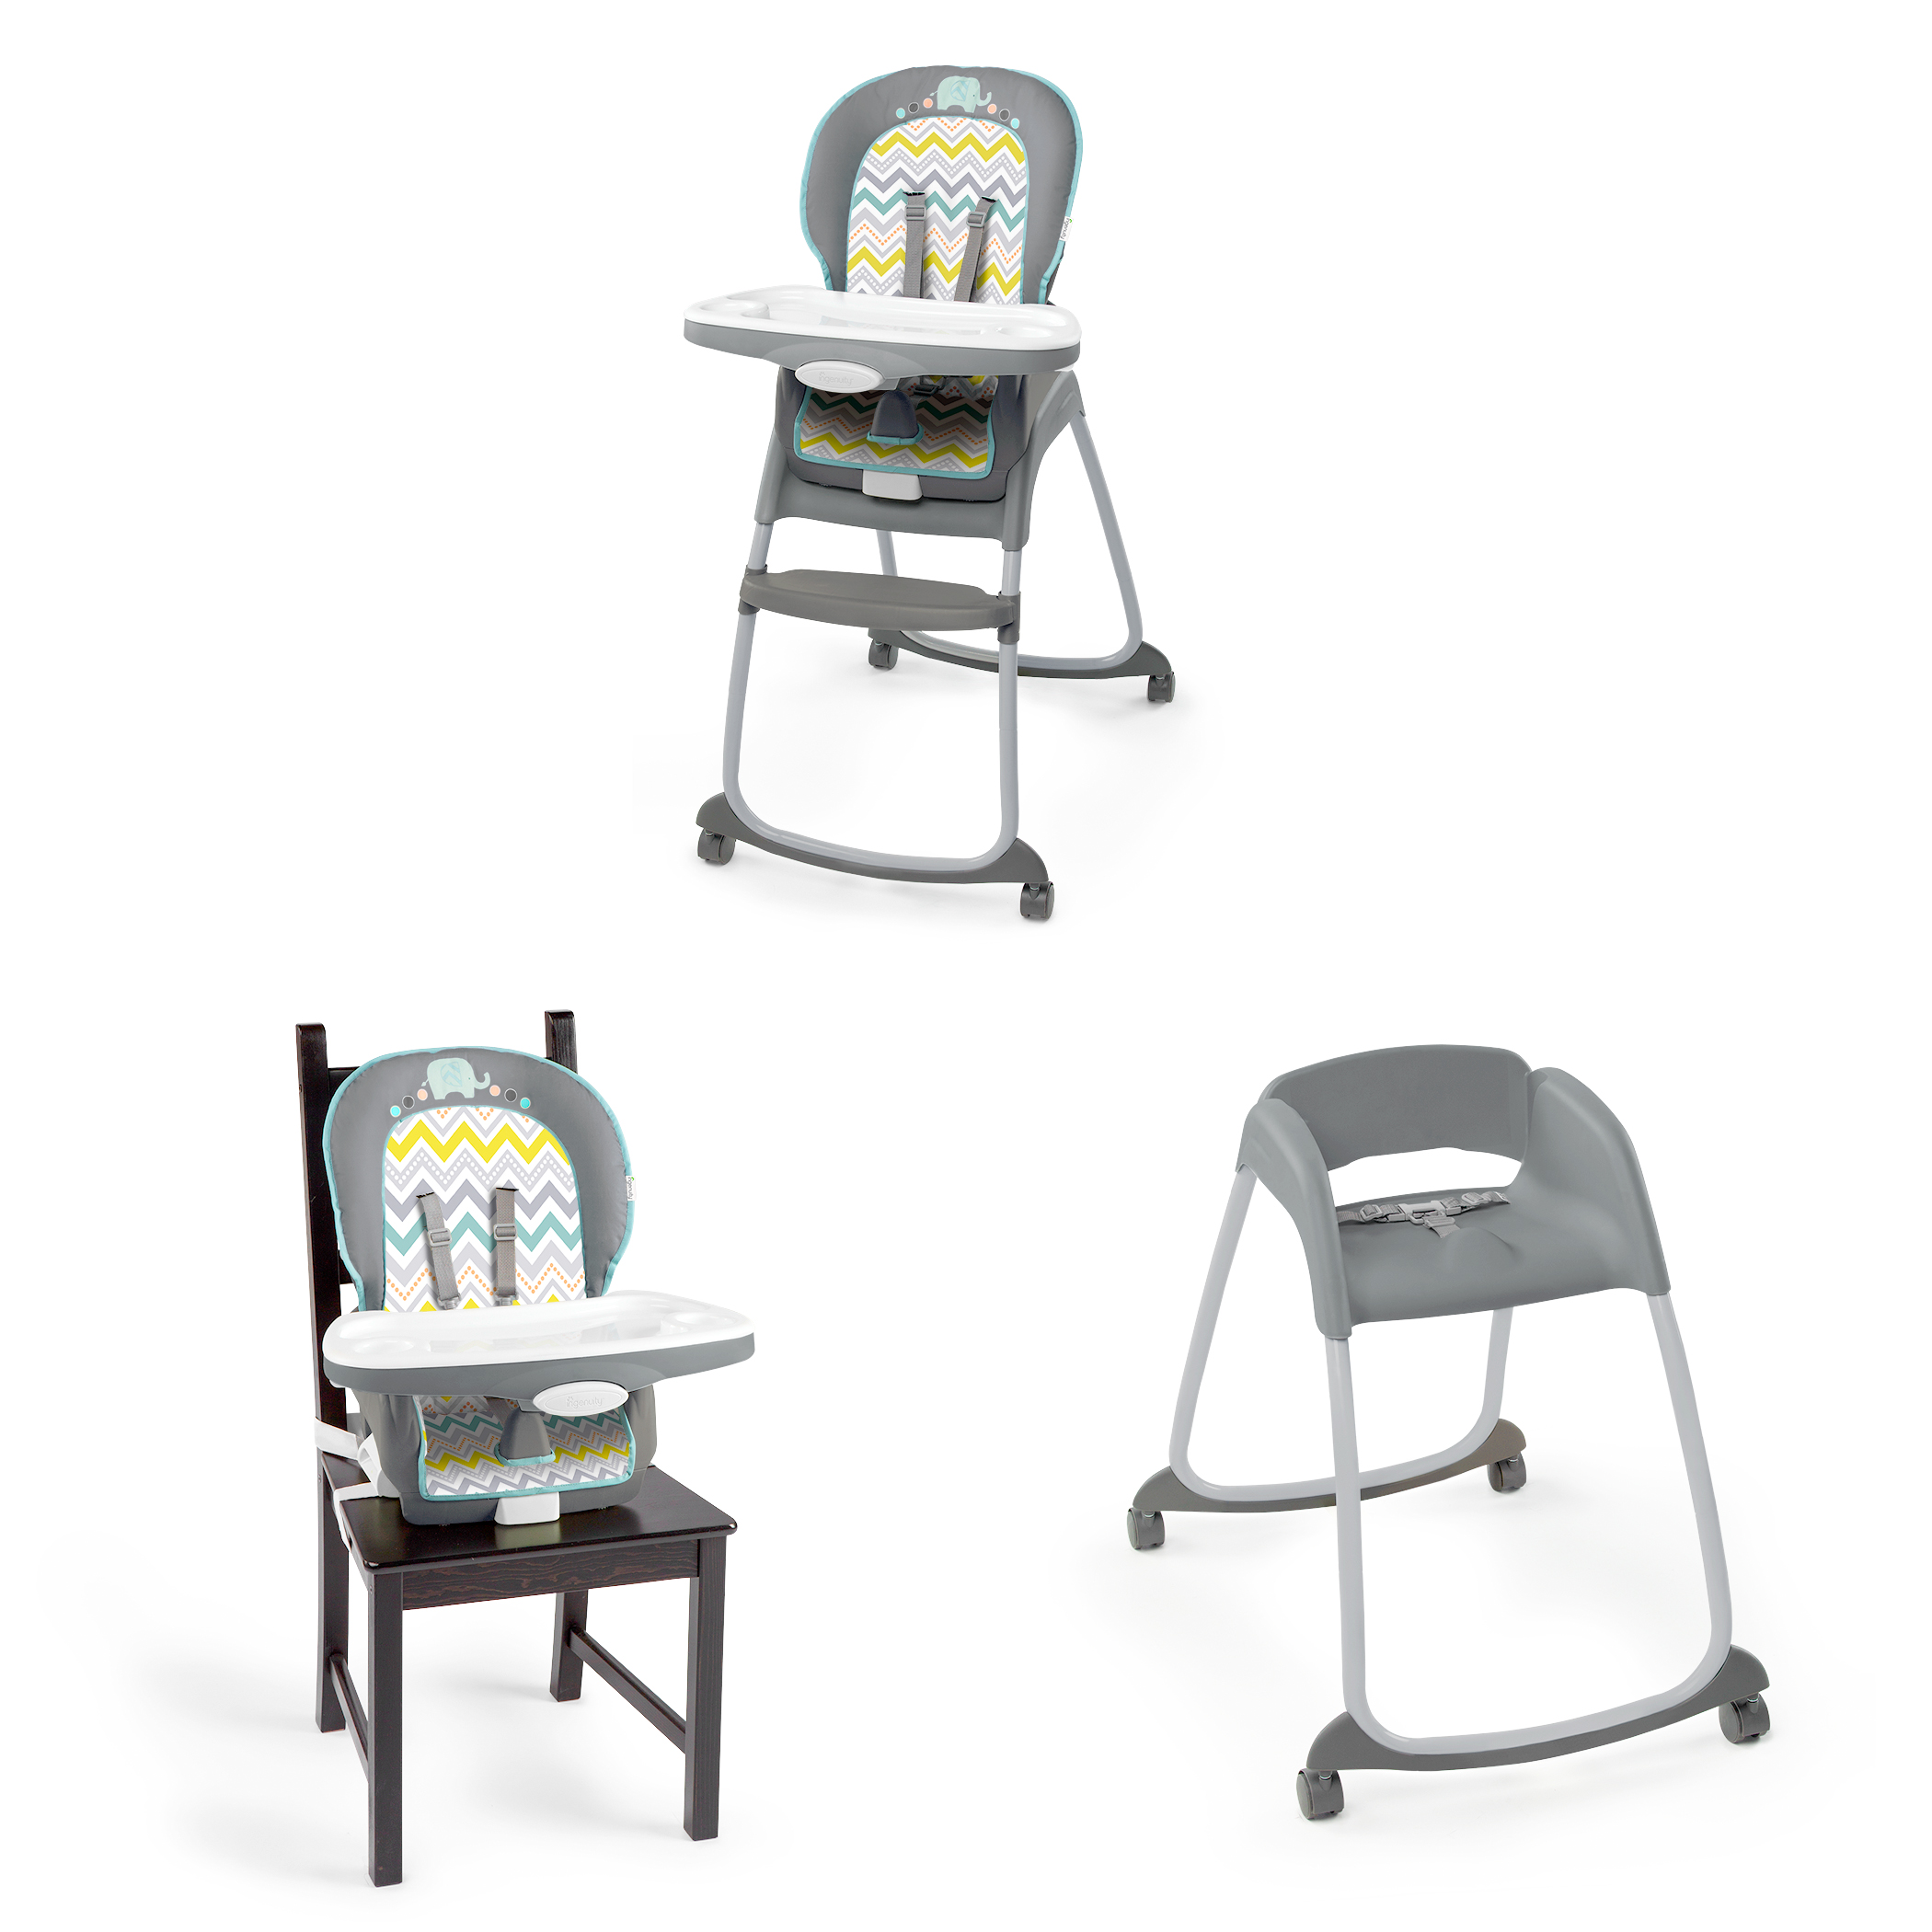 Ingenuity Trio 3-in-1 High Chair - Avondale - image 1 of 4